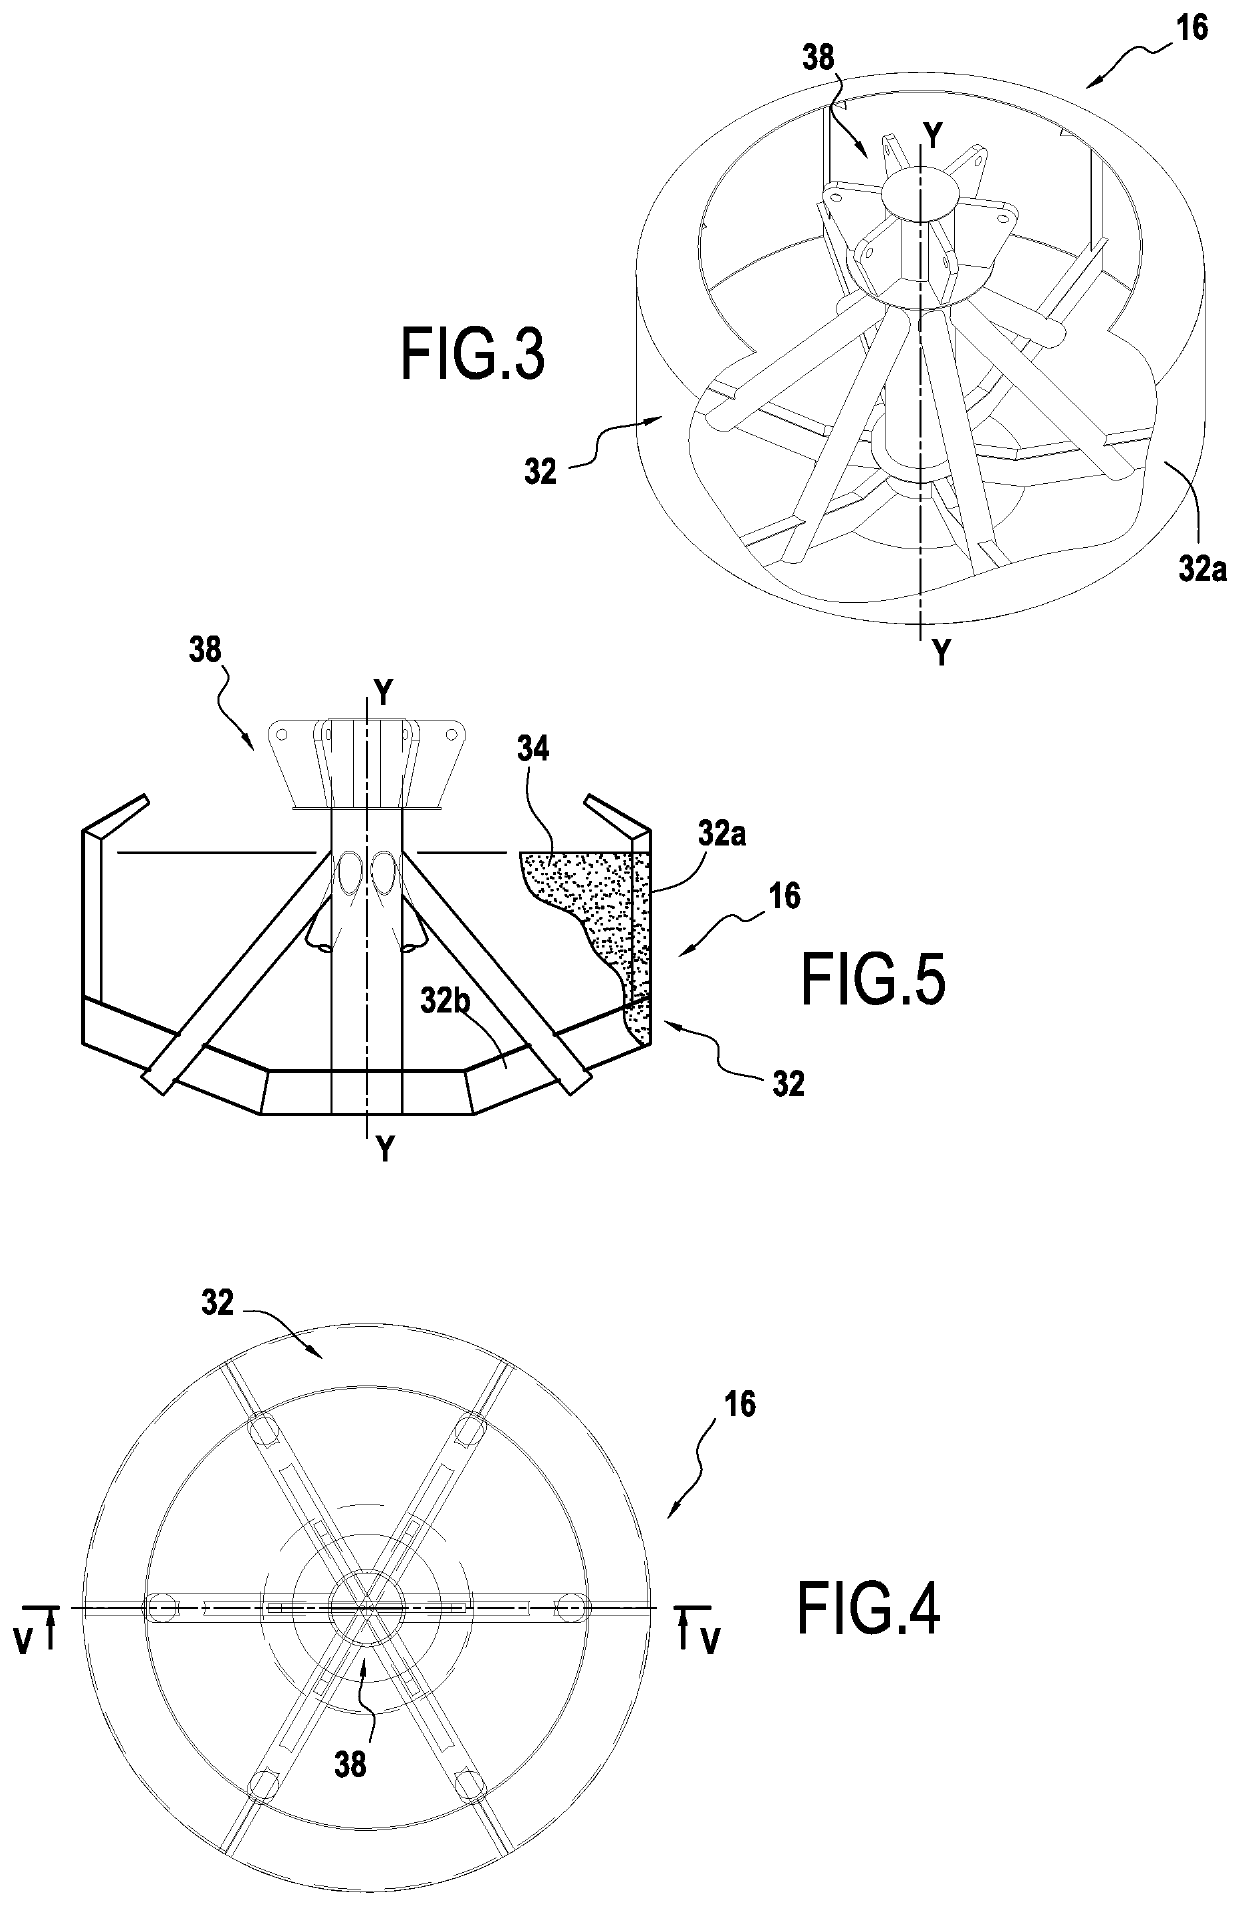 Floating support structure for offshore wind turbine and method for installing a wind turbine provided with such a support structure